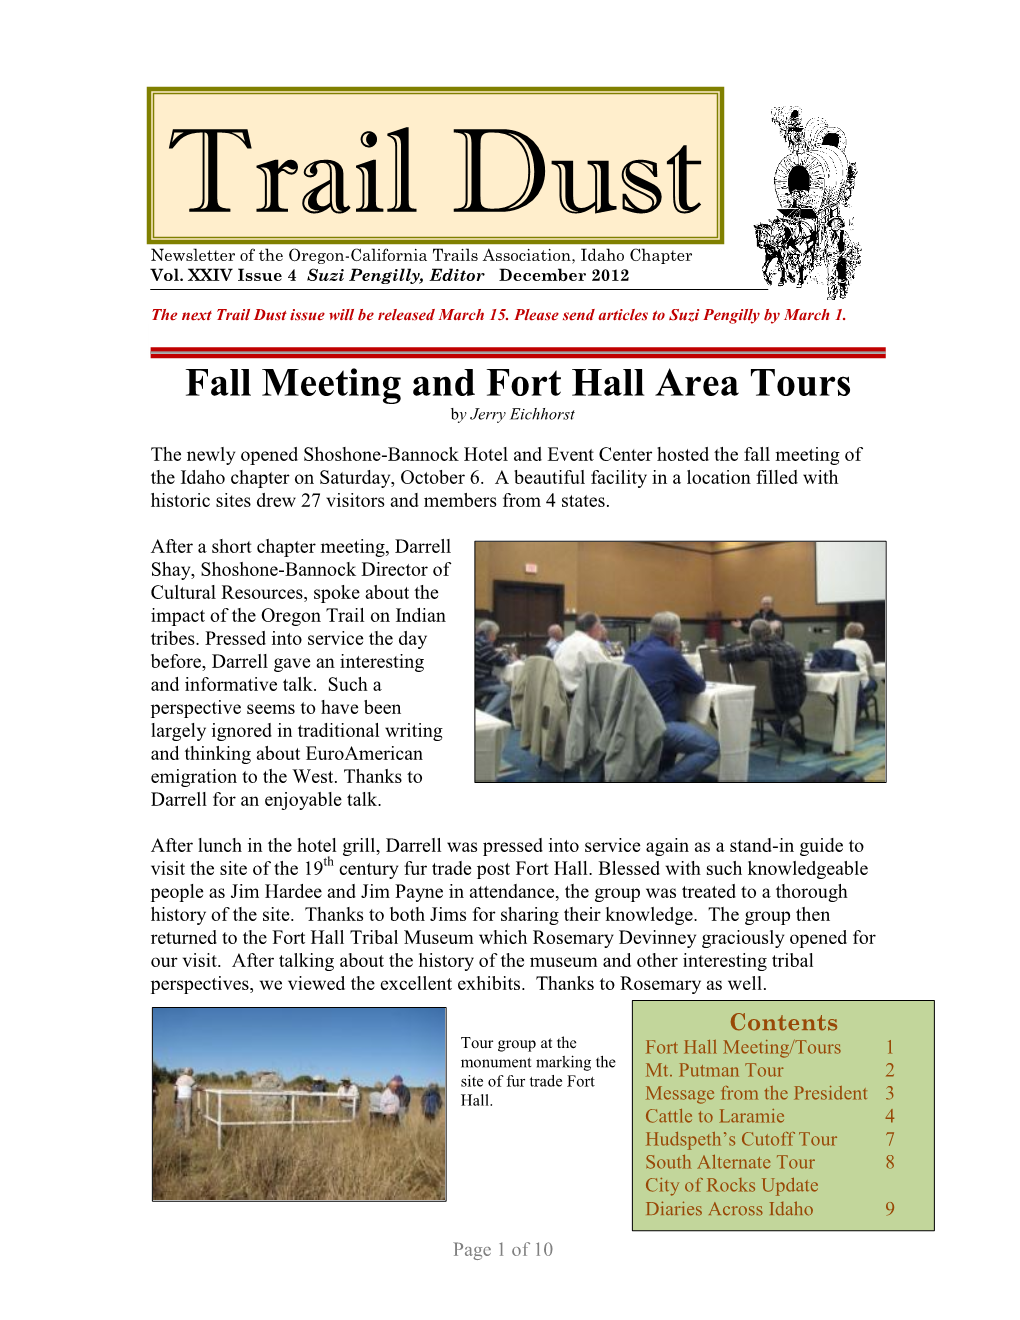 Newsletter of the Oregon-California Trails Association, Idaho Chapter Vol